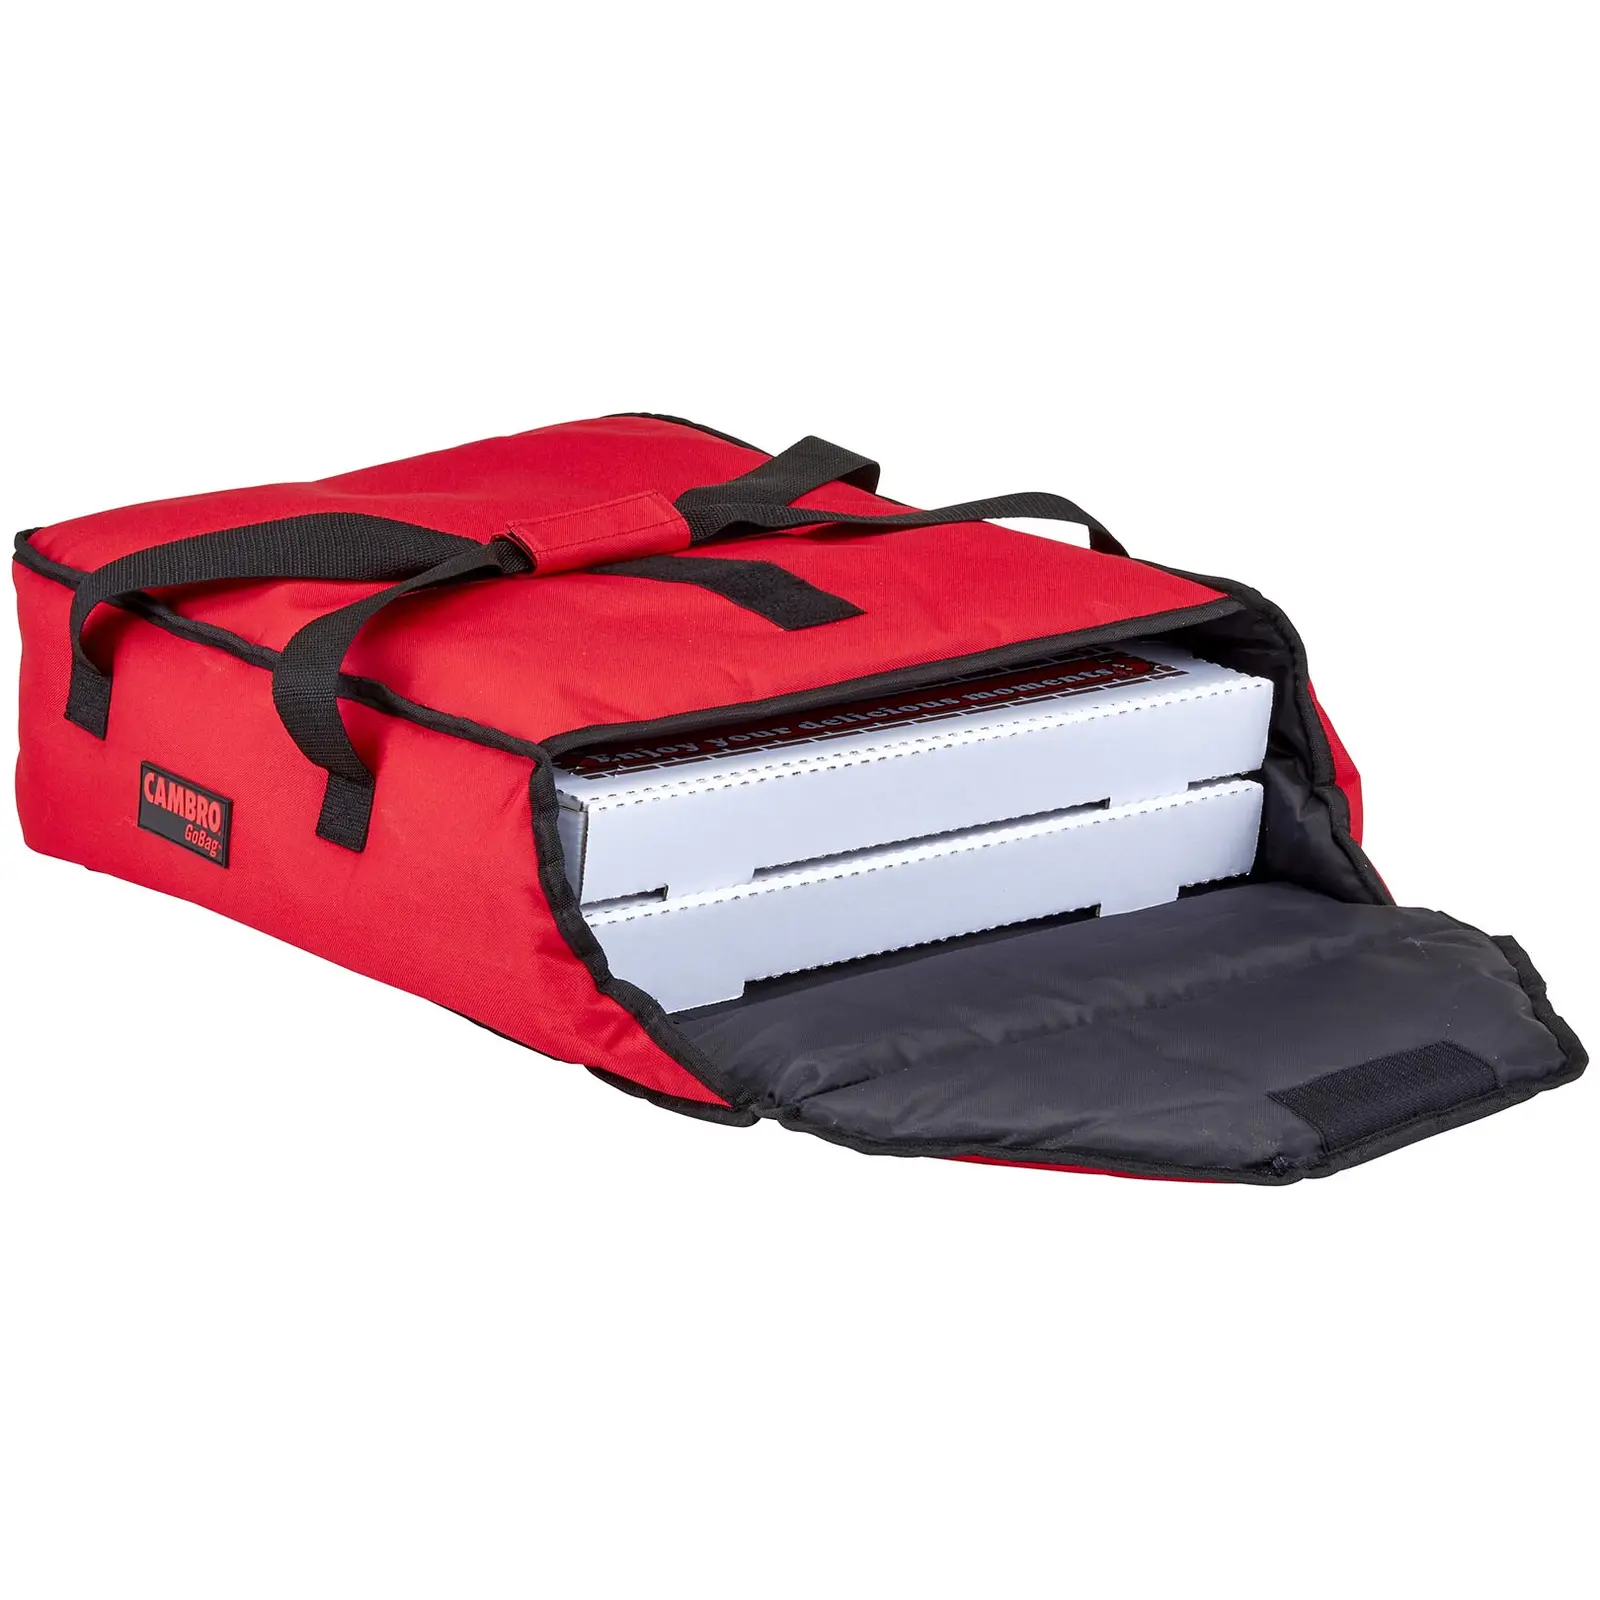 Pizza Delivery Bag - 42 x 46 x 16.5 cm - Red